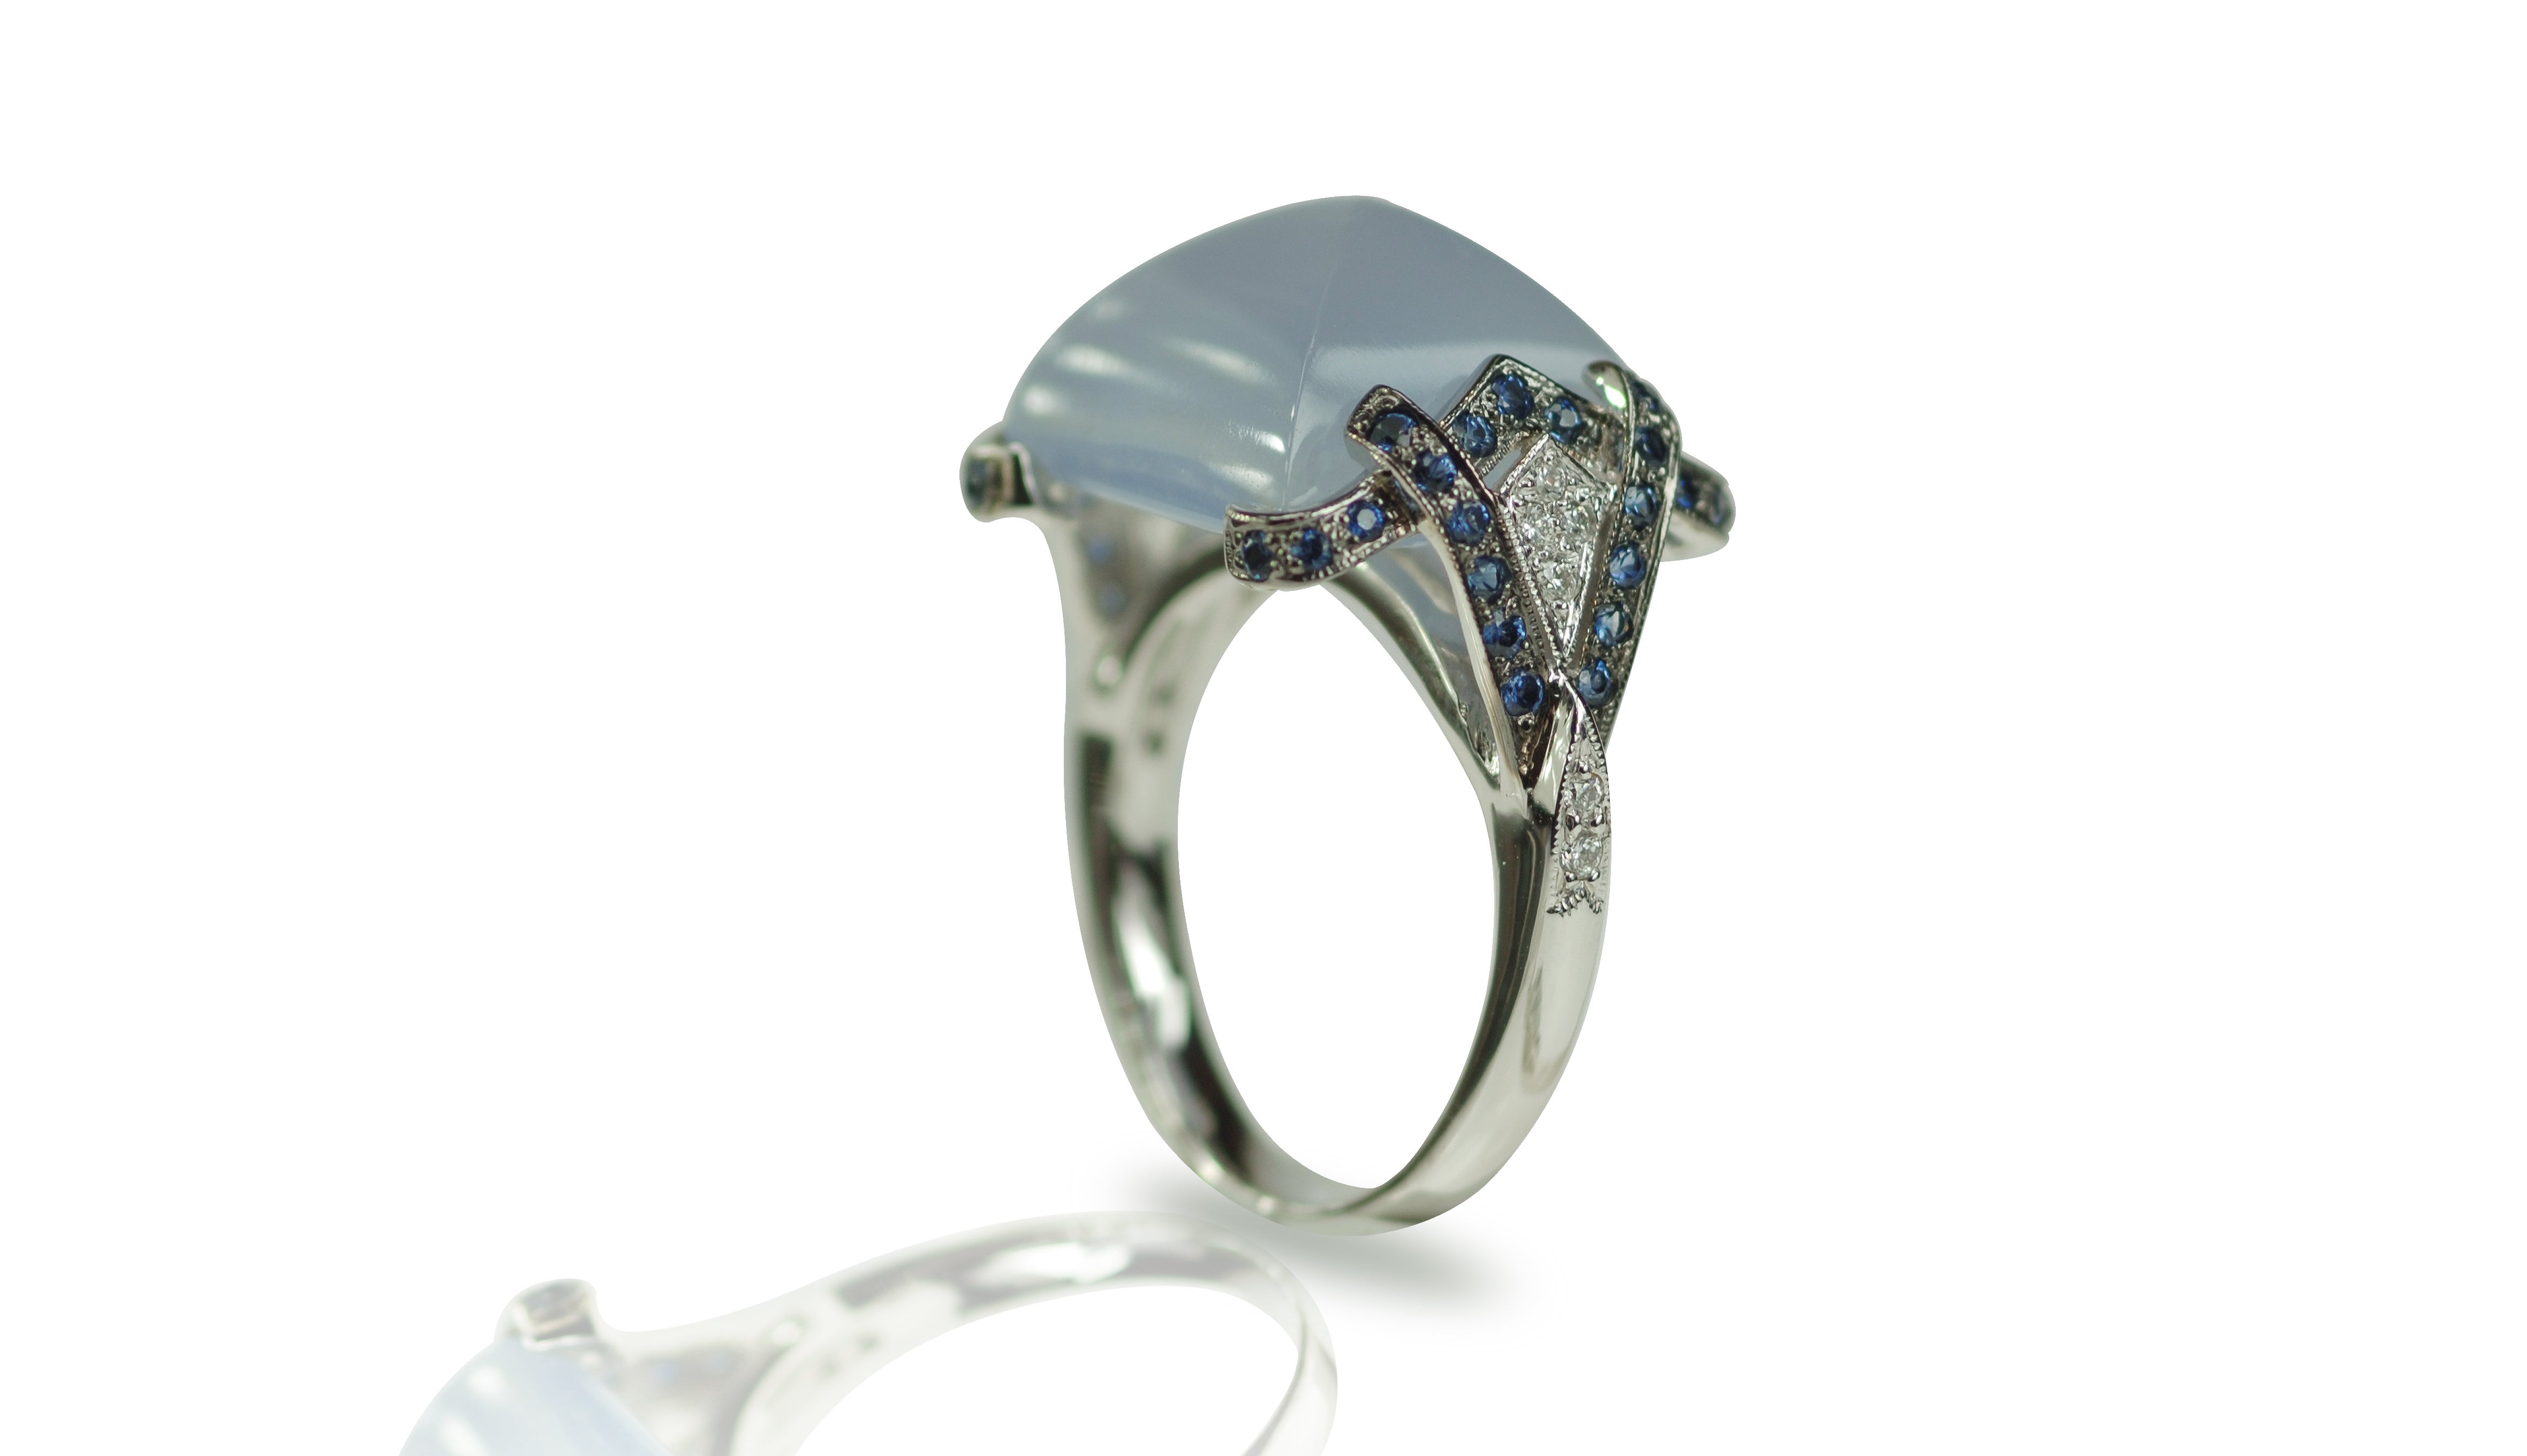 Chalcedony 13.25 carats with Blue Sapphire 0.52 carat and Diamond 0.11 carat Ring set in 18 Karat White Gold Settings

Width:  2.1 cm 
Length: 1.7 cm
Ring Size: 54
Total Weight: 9.56 grams

